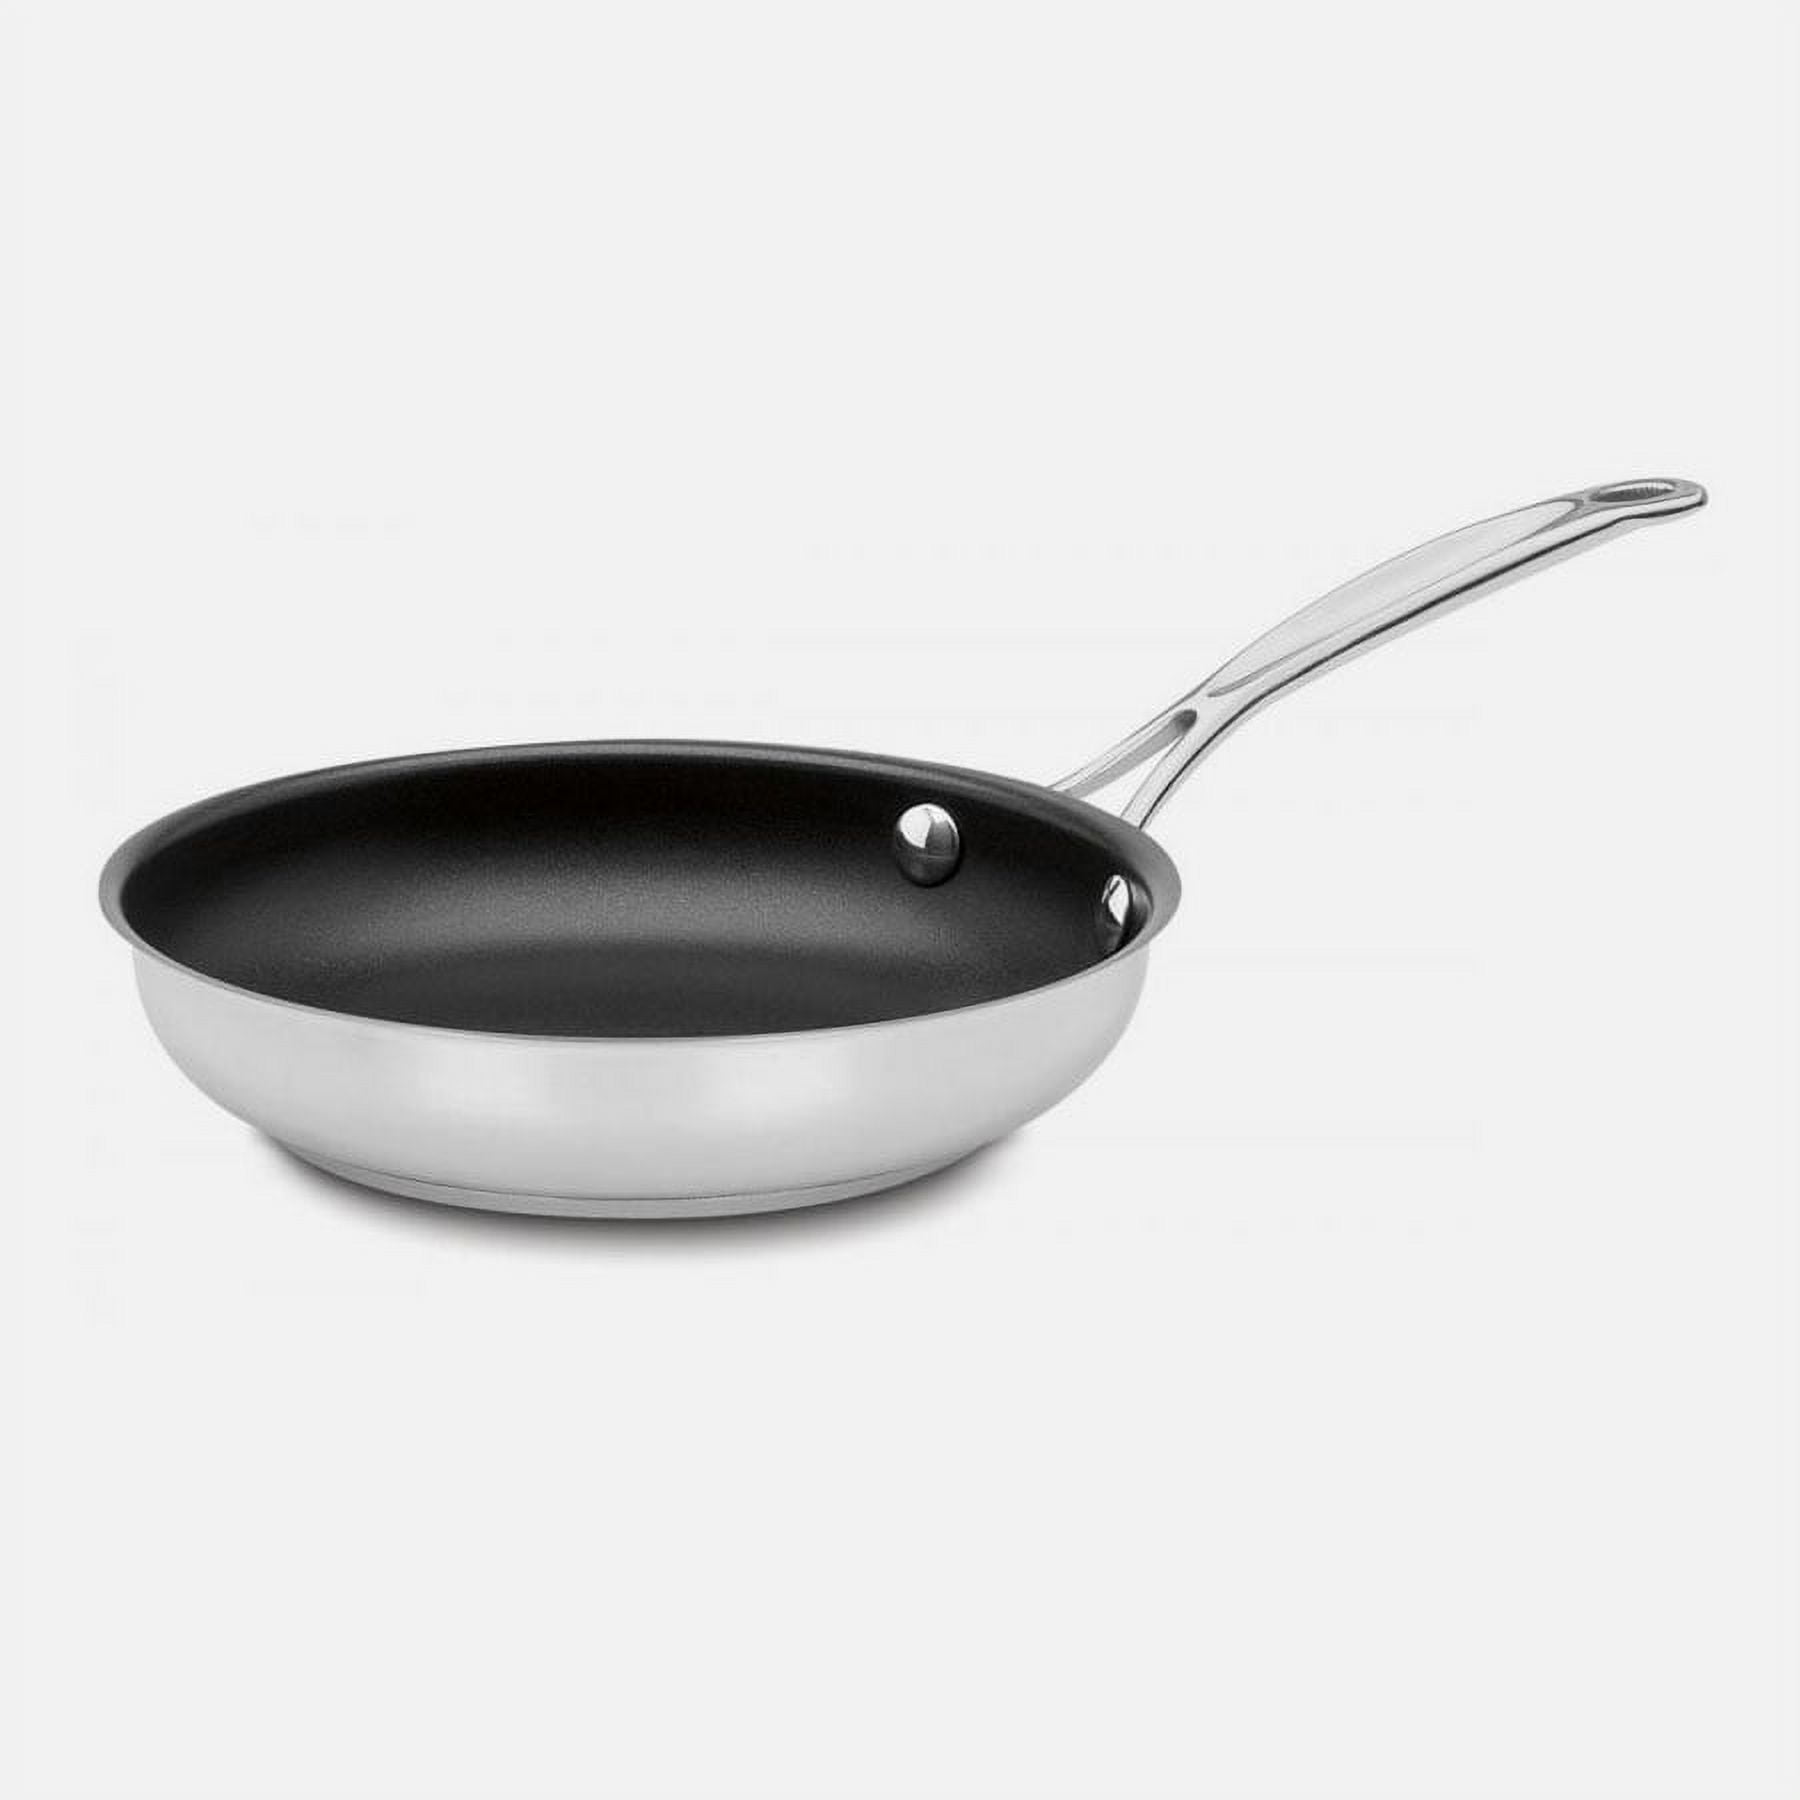 Cuisinart Chef's Classic 14-Inch Skillet Review: Great for